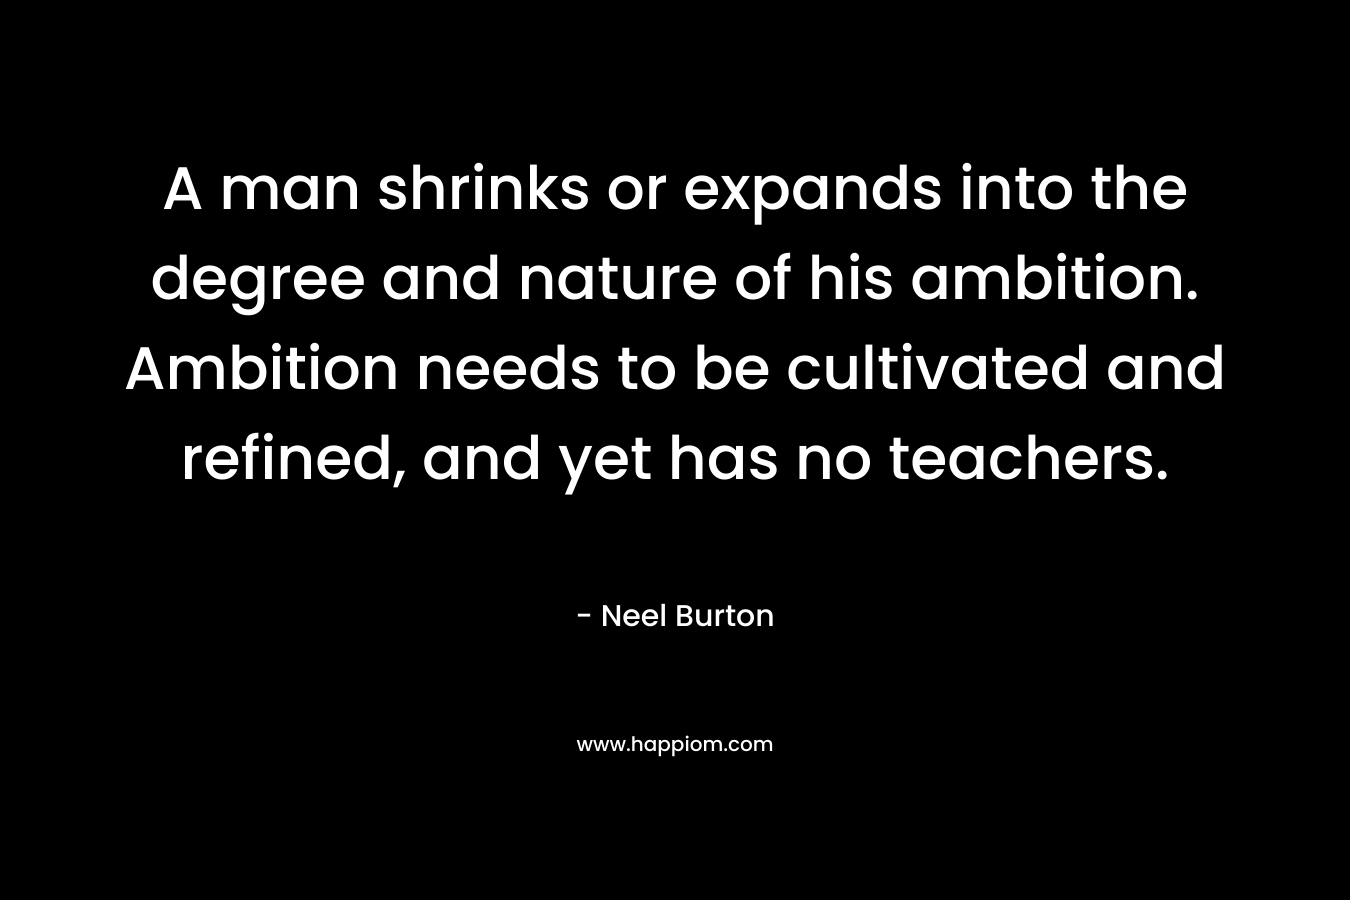 A man shrinks or expands into the degree and nature of his ambition. Ambition needs to be cultivated and refined, and yet has no teachers.